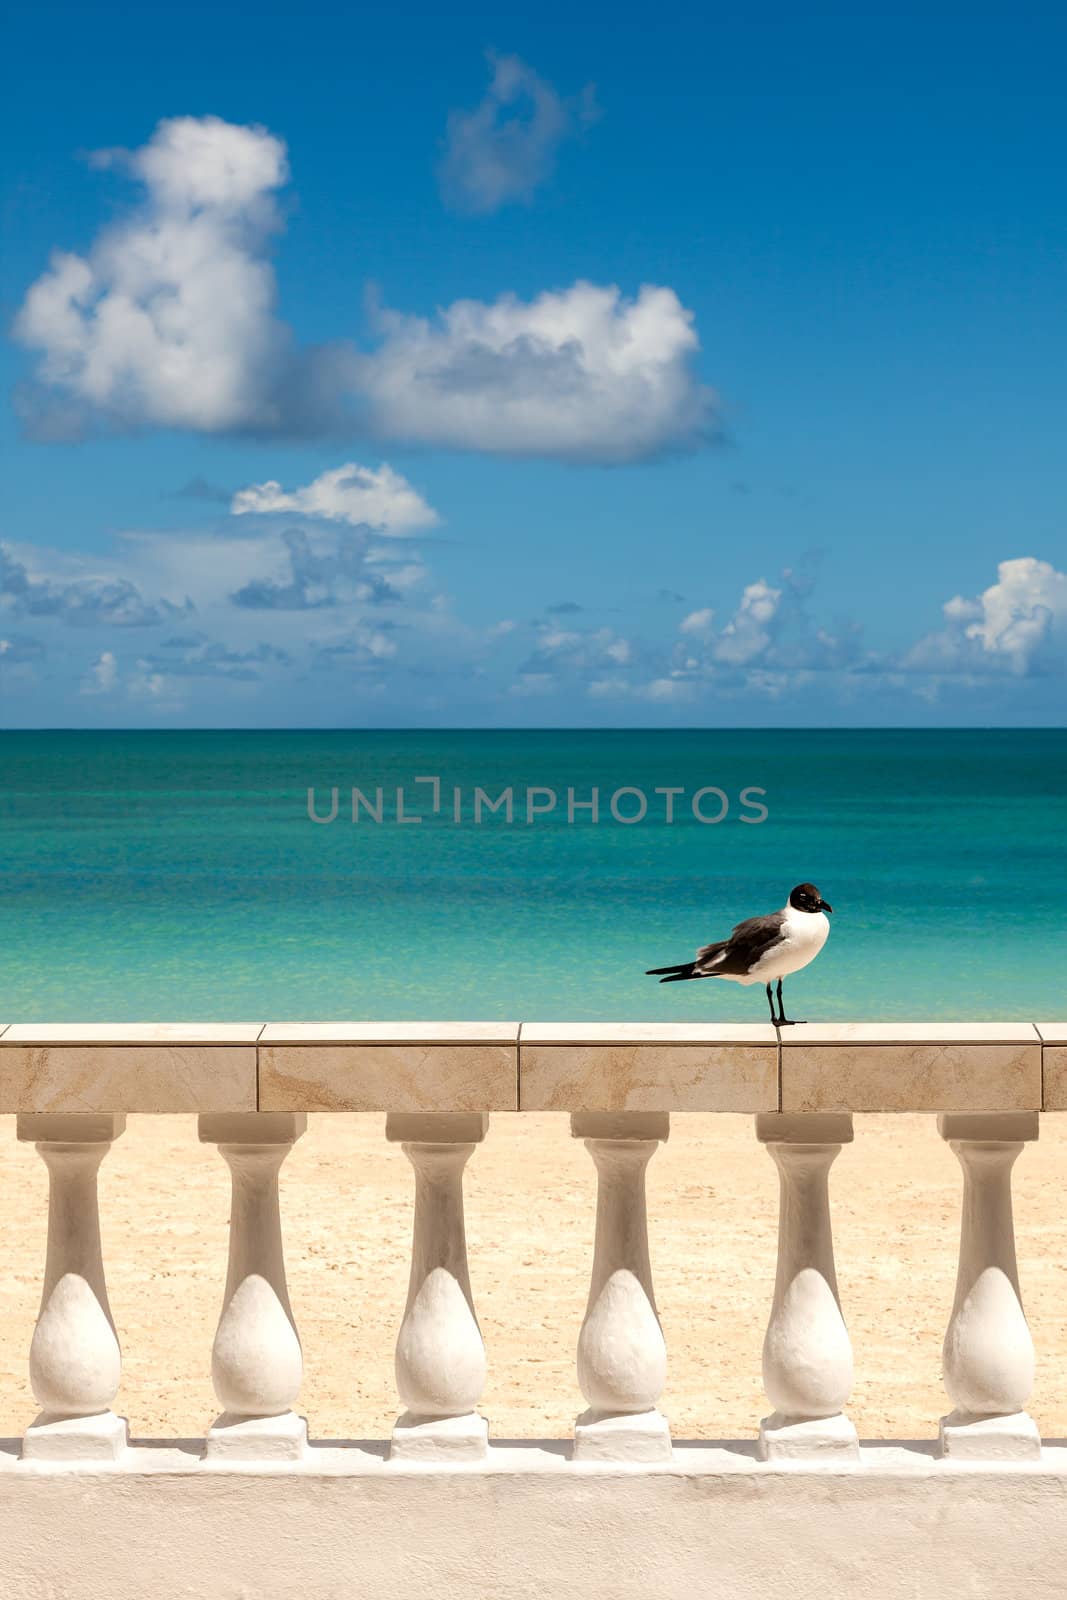 Sunny Tropical Seashore with Gull Sitting on Fence by scheriton